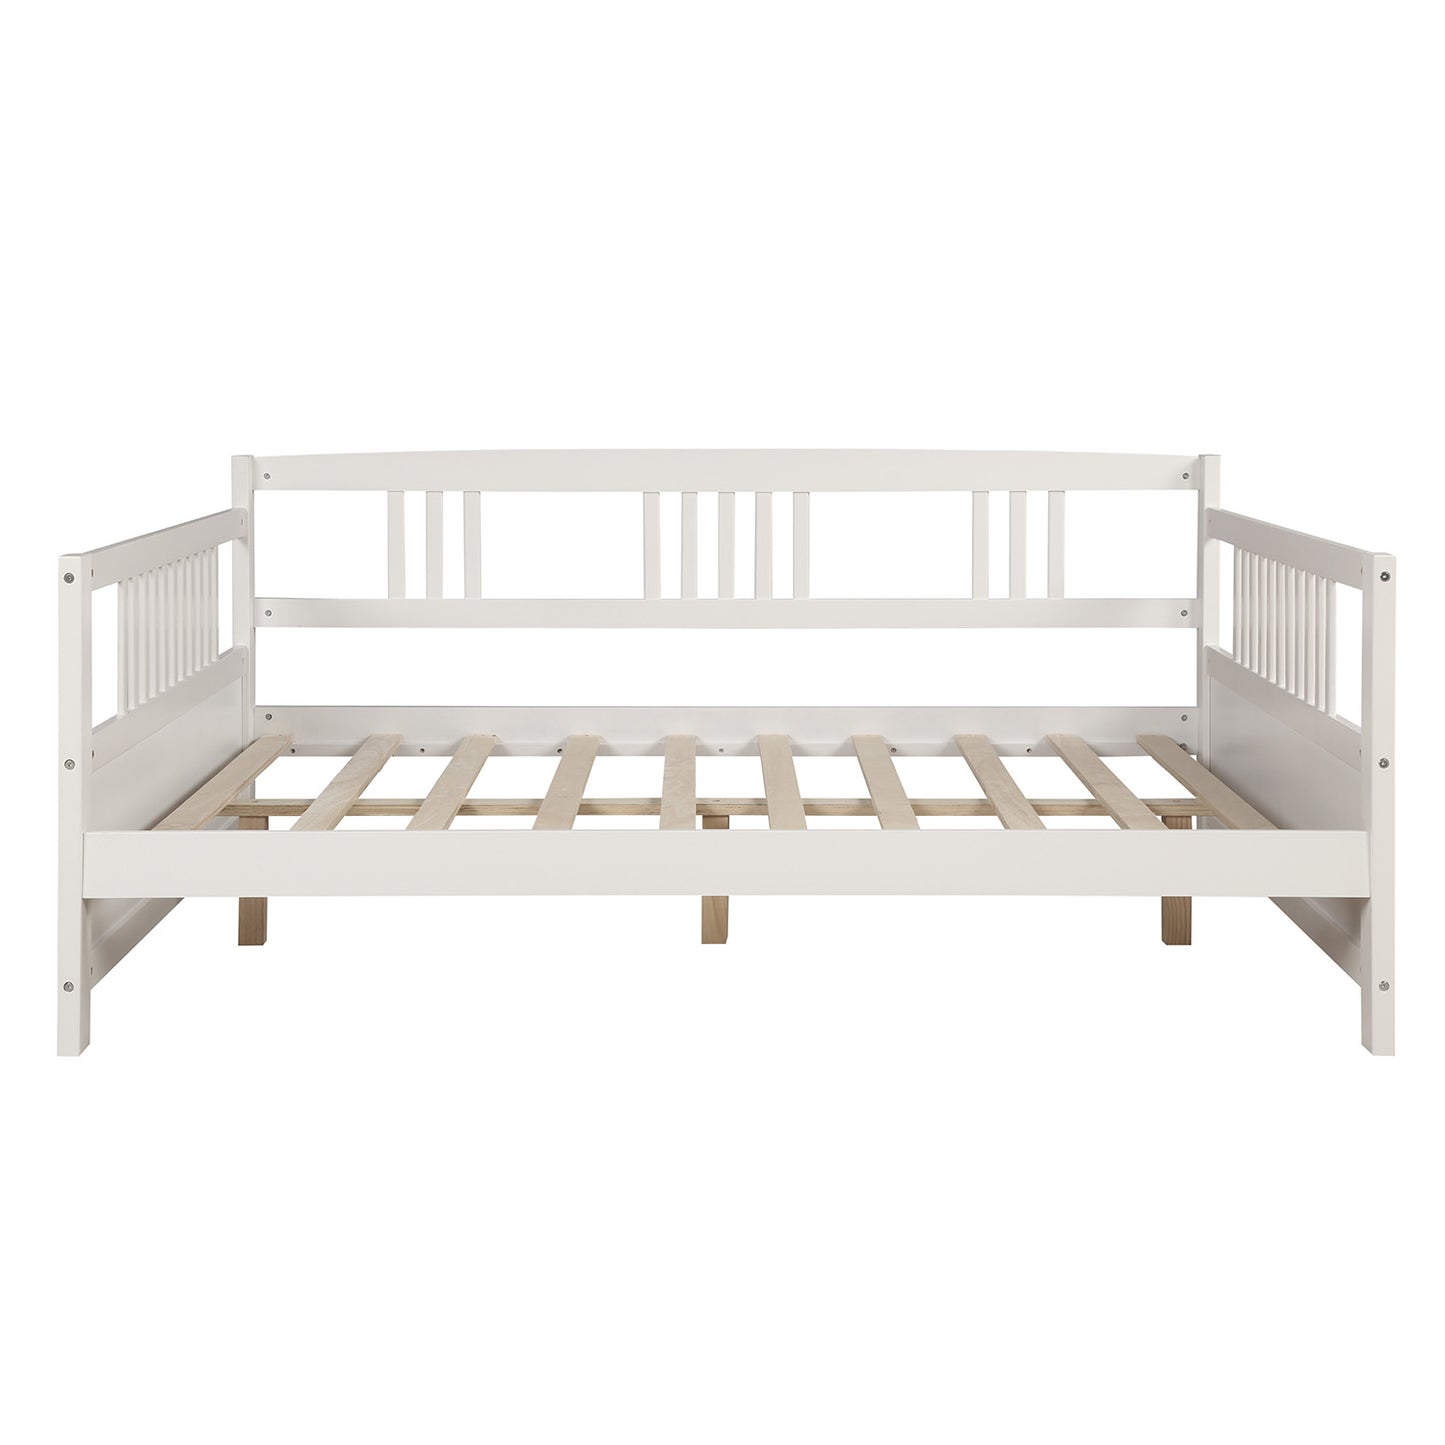 Wood Daybed Full Size Daybed with Support Legs, White (Previous SKU: WF190235AAK)